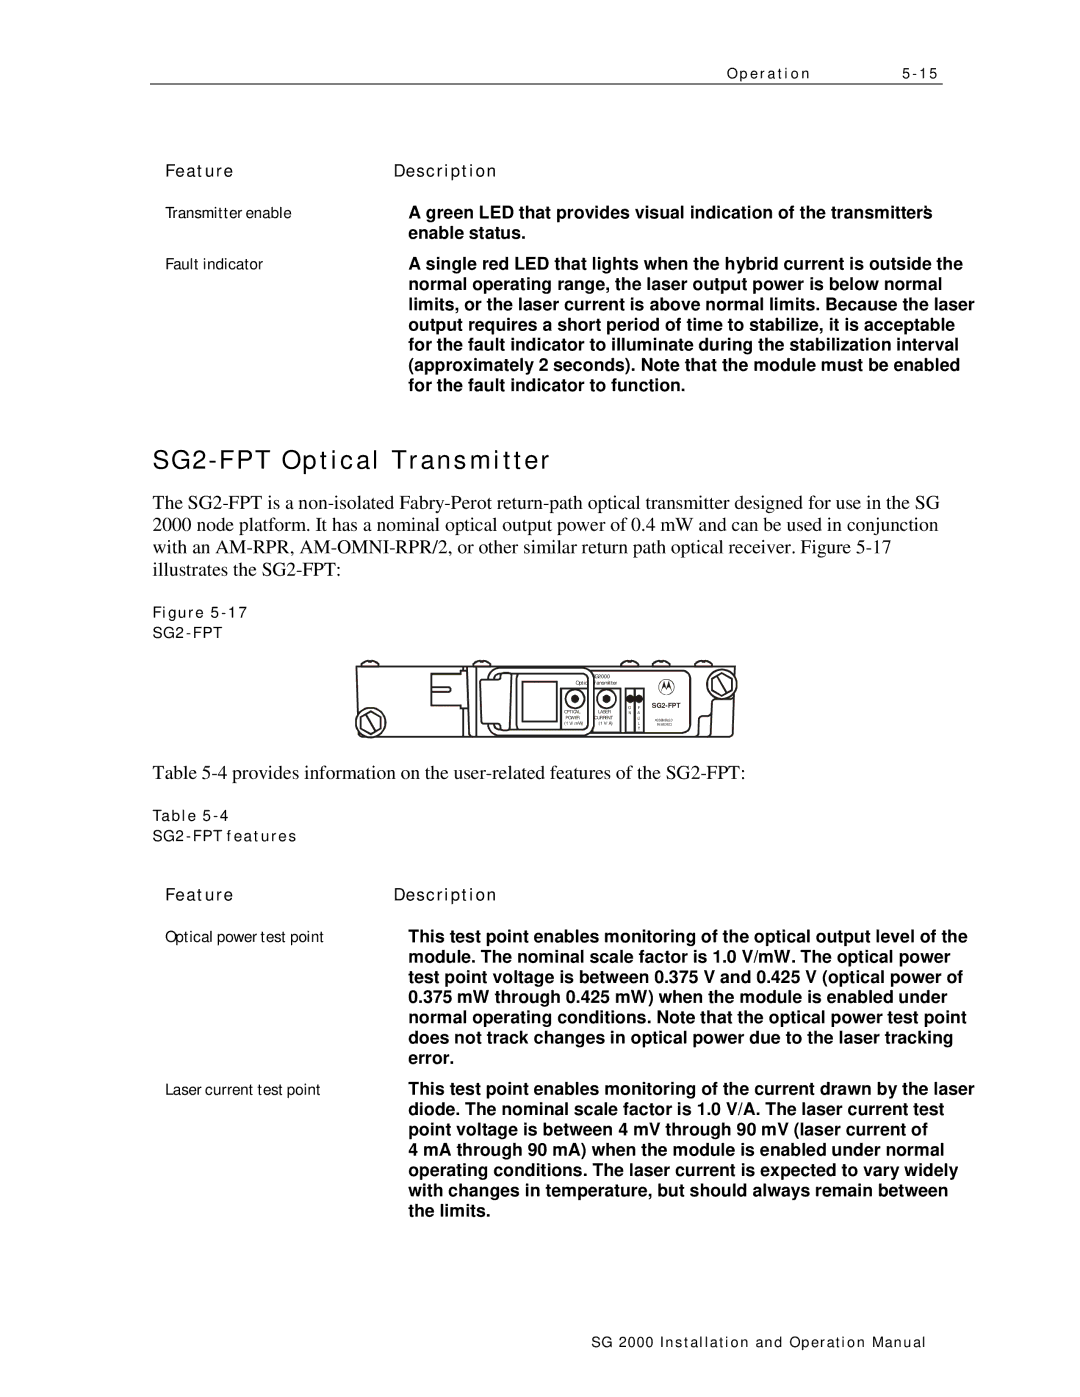 Motorola SG 2000 operation manual SG2 FPT Optical Transmitter, Transmitter enable, SG2-FPT features 